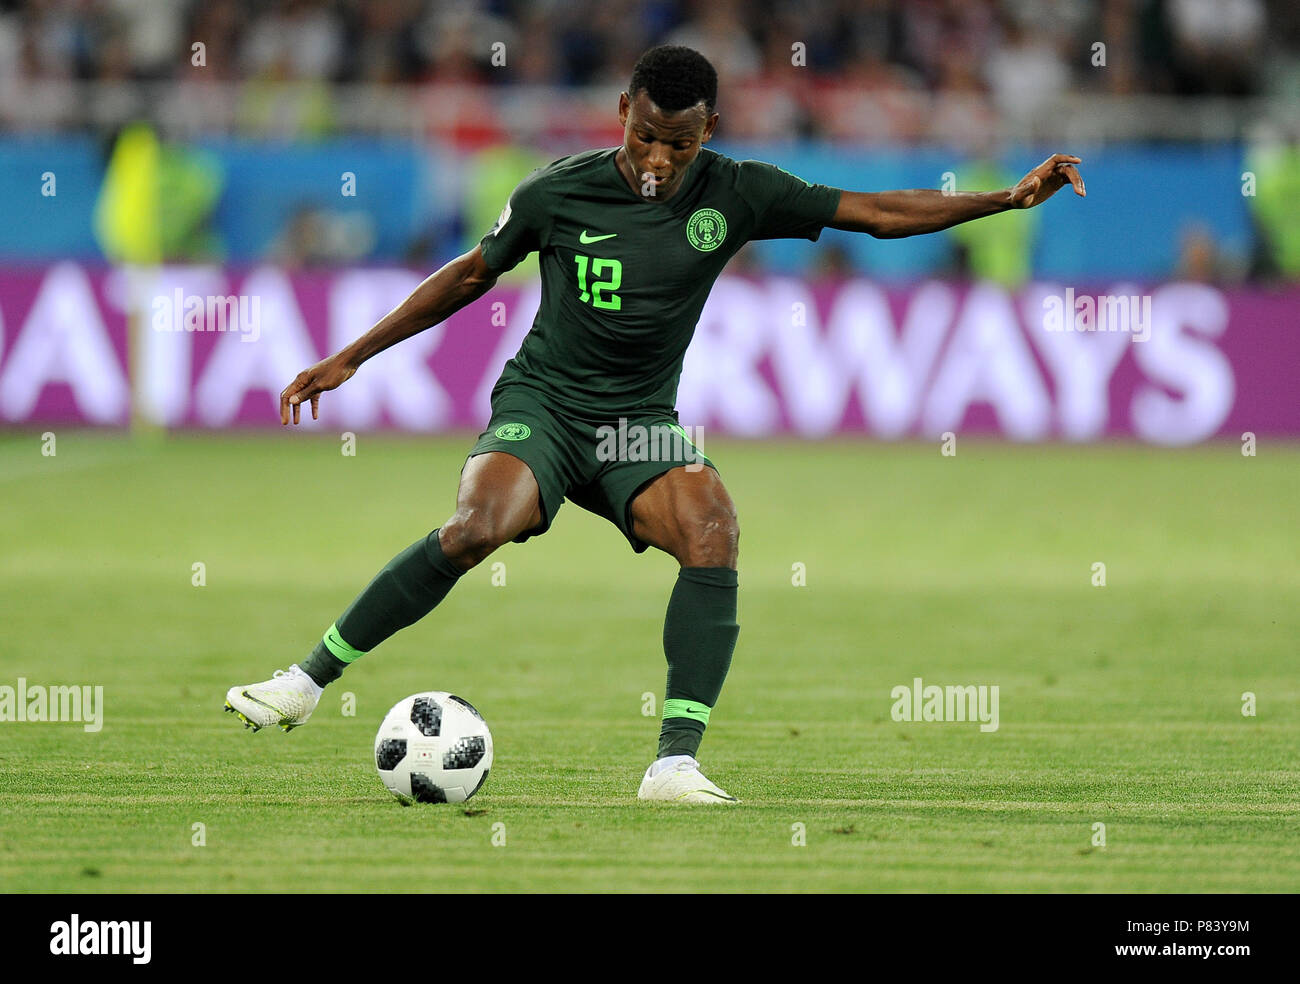 KALININGRAD, RUSSIA - JUNE 16: Abdullahi Shehu of Nigeria in action during the 2018 FIFA World Cup Russia group D match between Croatia and Nigeria at Kaliningrad Stadium on June 16, 2018 in Kaliningrad, Russia. (Photo by Norbert Barczyk/PressFocus/MB Media) Stock Photo